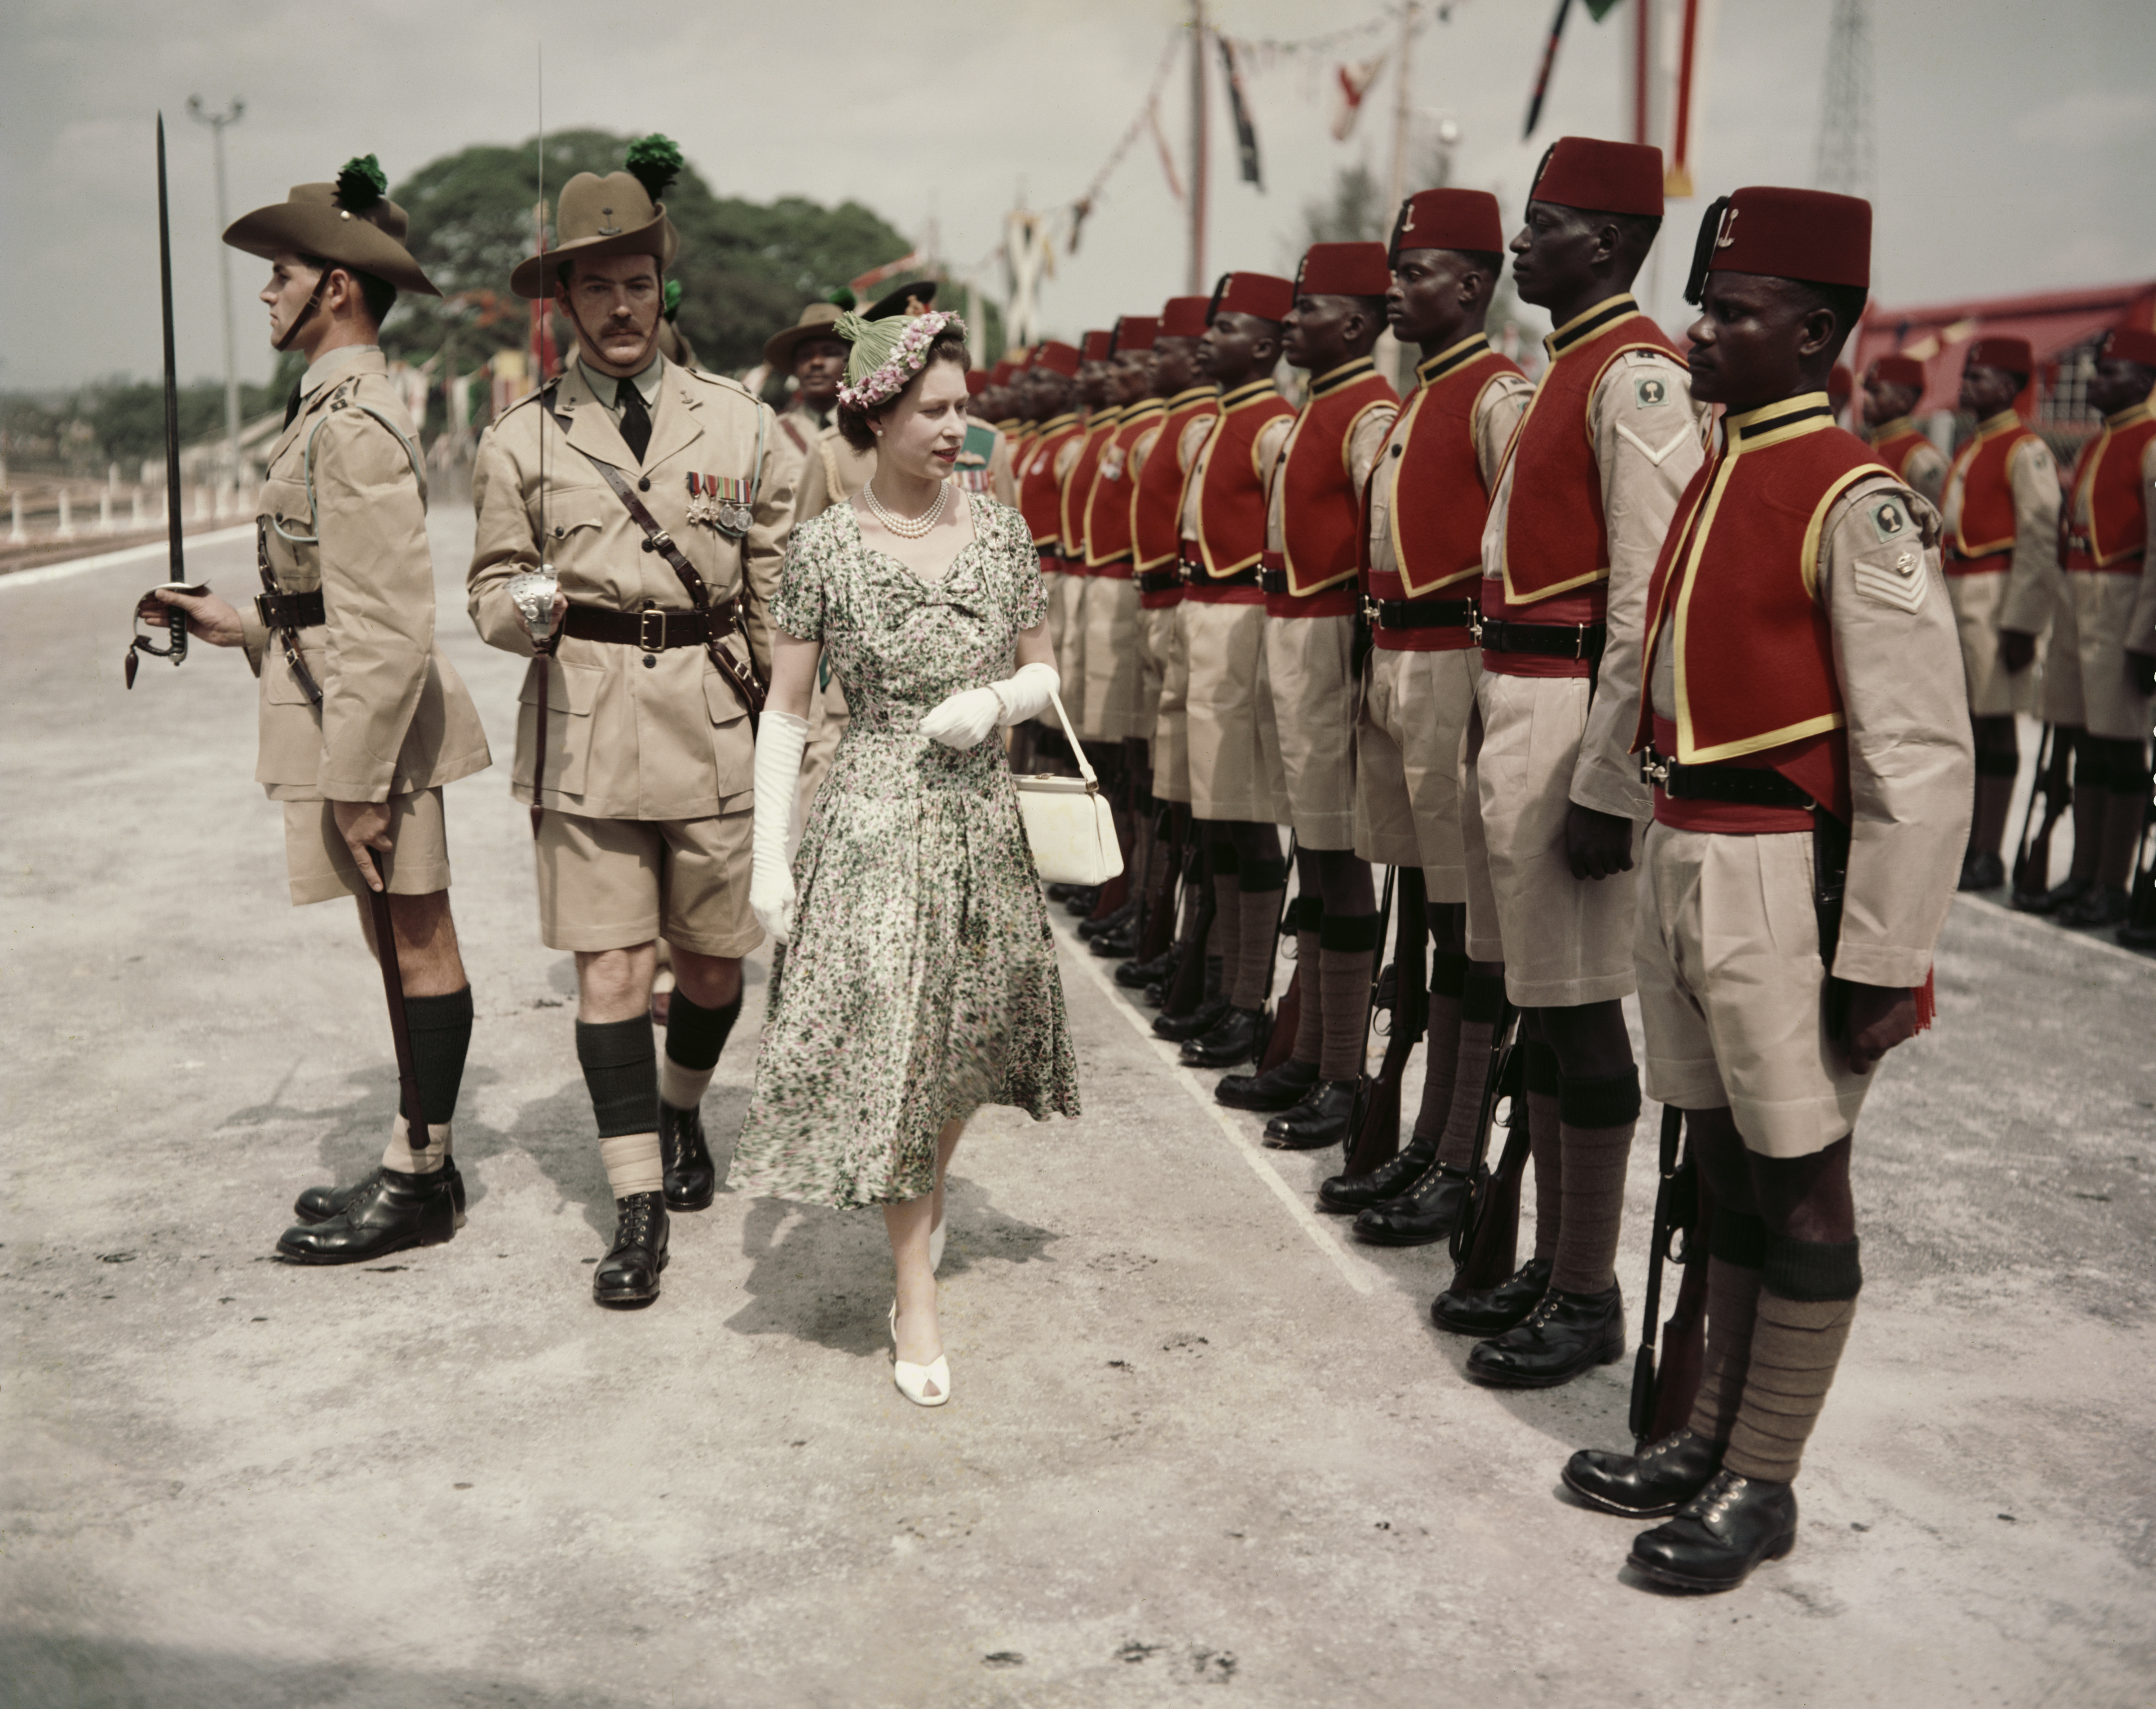 Queen Elizabeth II inspects men of the newly-renamed Queen's Own Nigeria Regiment, Royal West African Frontier Force, at Kaduna Airport, Nigeria, during her Commonwealth Tour, 2nd February 1956. (Photo by Fox Photos/Hulton Archive/Getty Images) (Getty Images&mdash;2012 Getty Images)